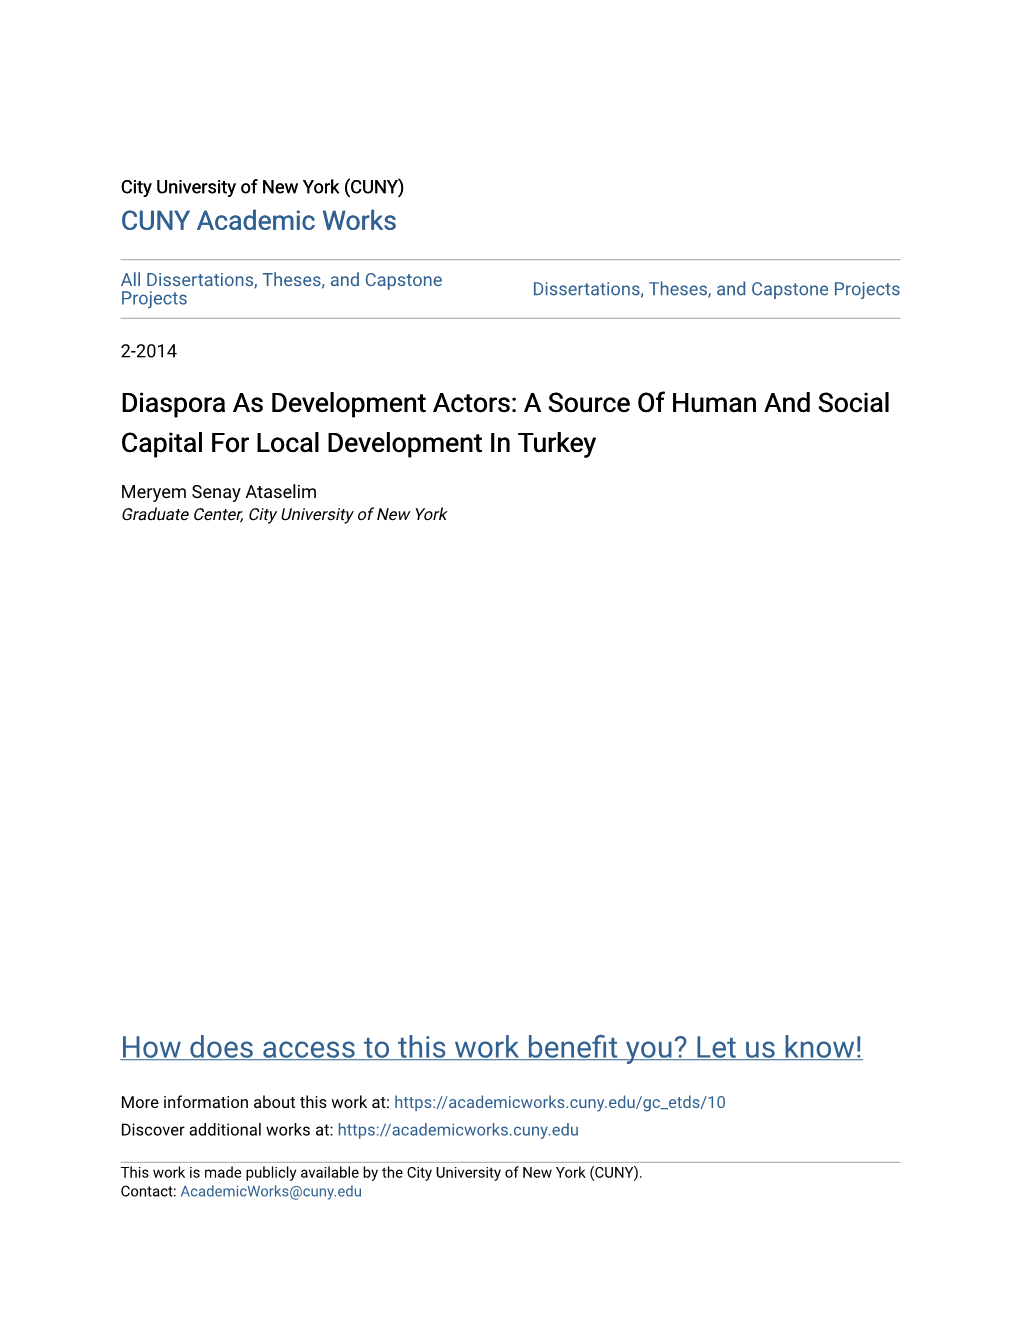 Diaspora As Development Actors: a Source of Human and Social Capital for Local Development in Turkey